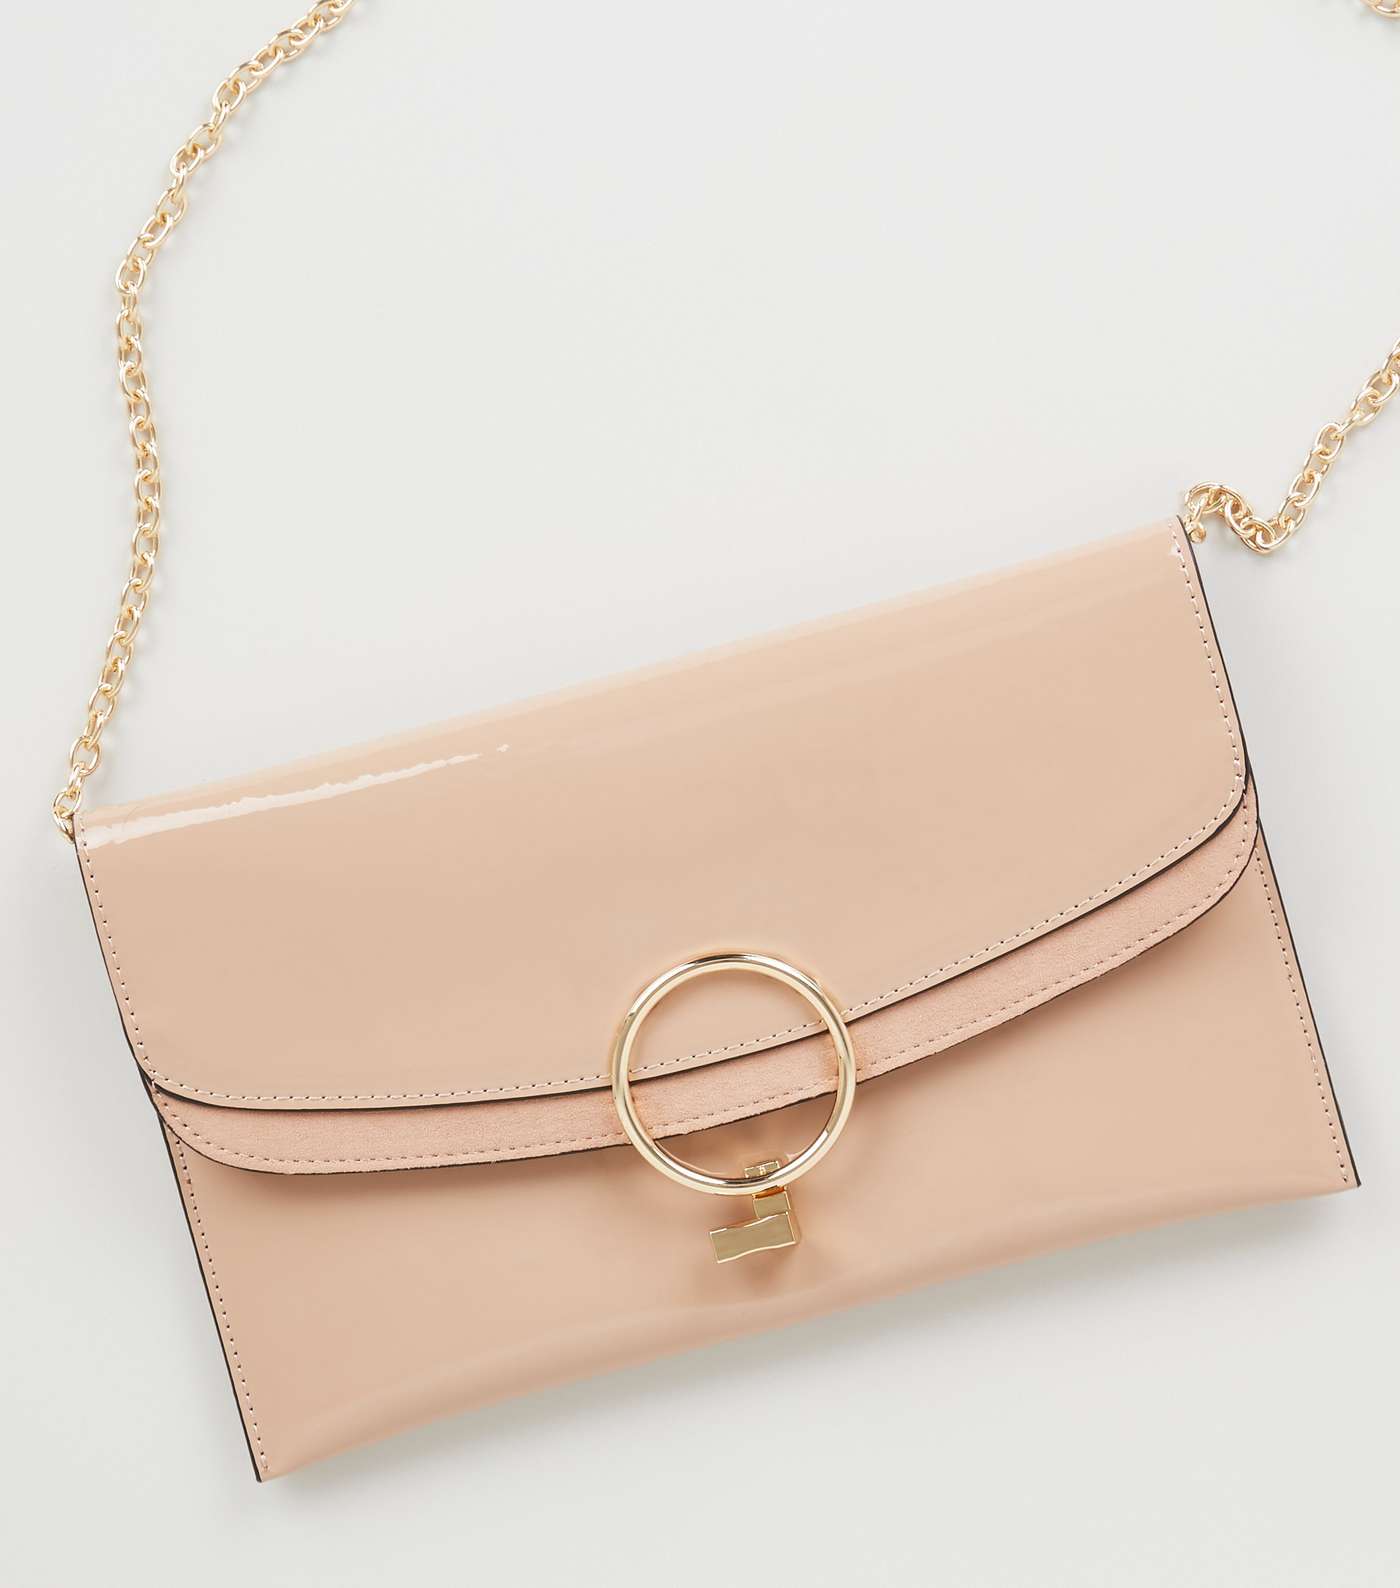 Pale Pink Patent Ring Clutch Bag Image 3